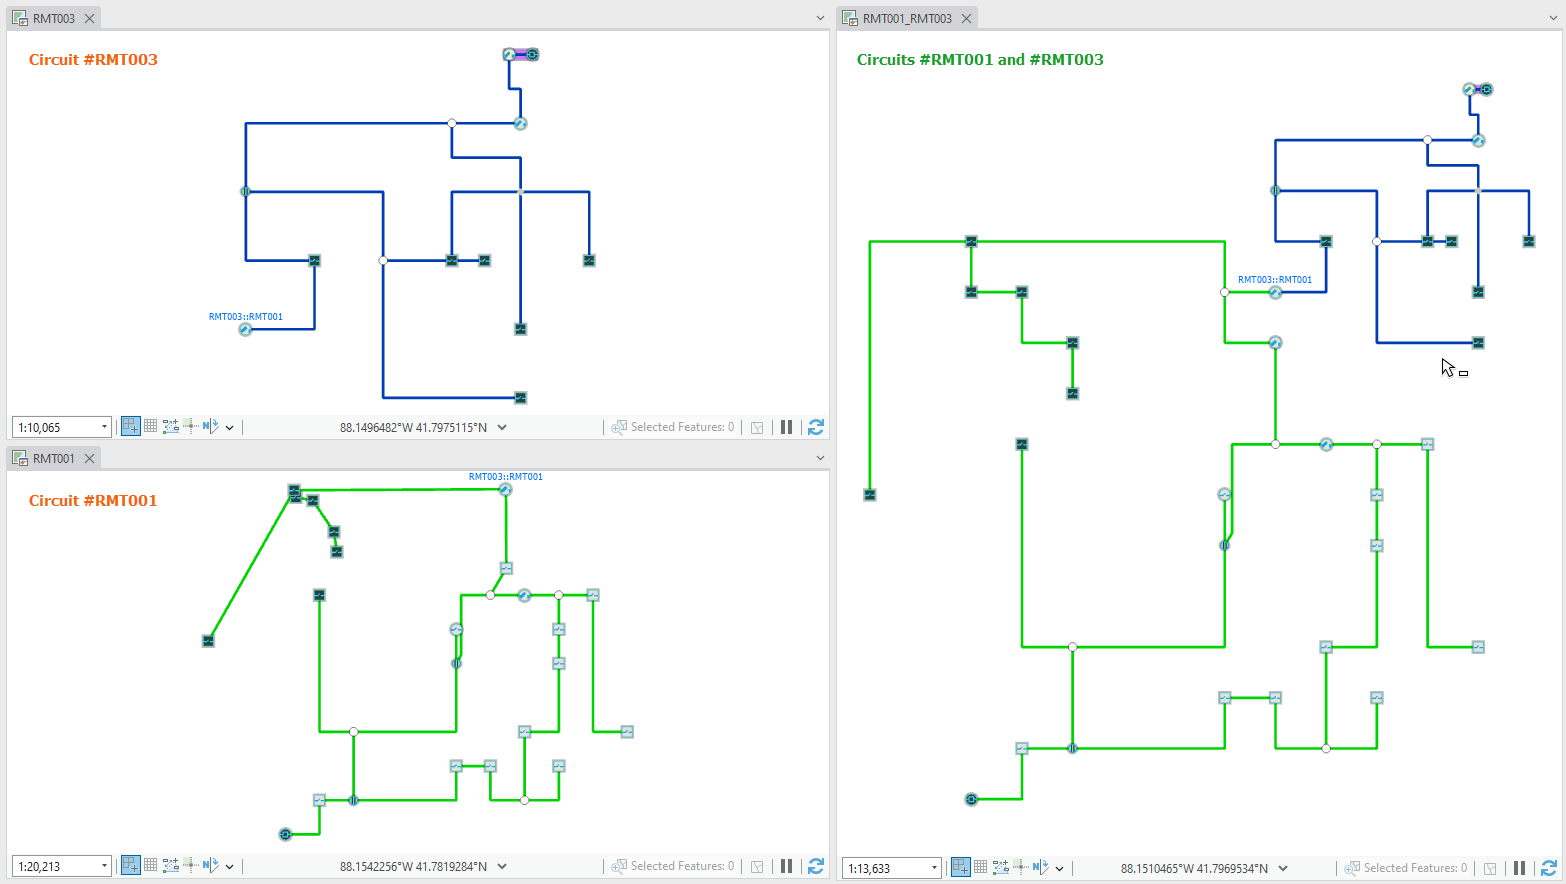 State of the same electric circuit diagram samples after the load balance operation